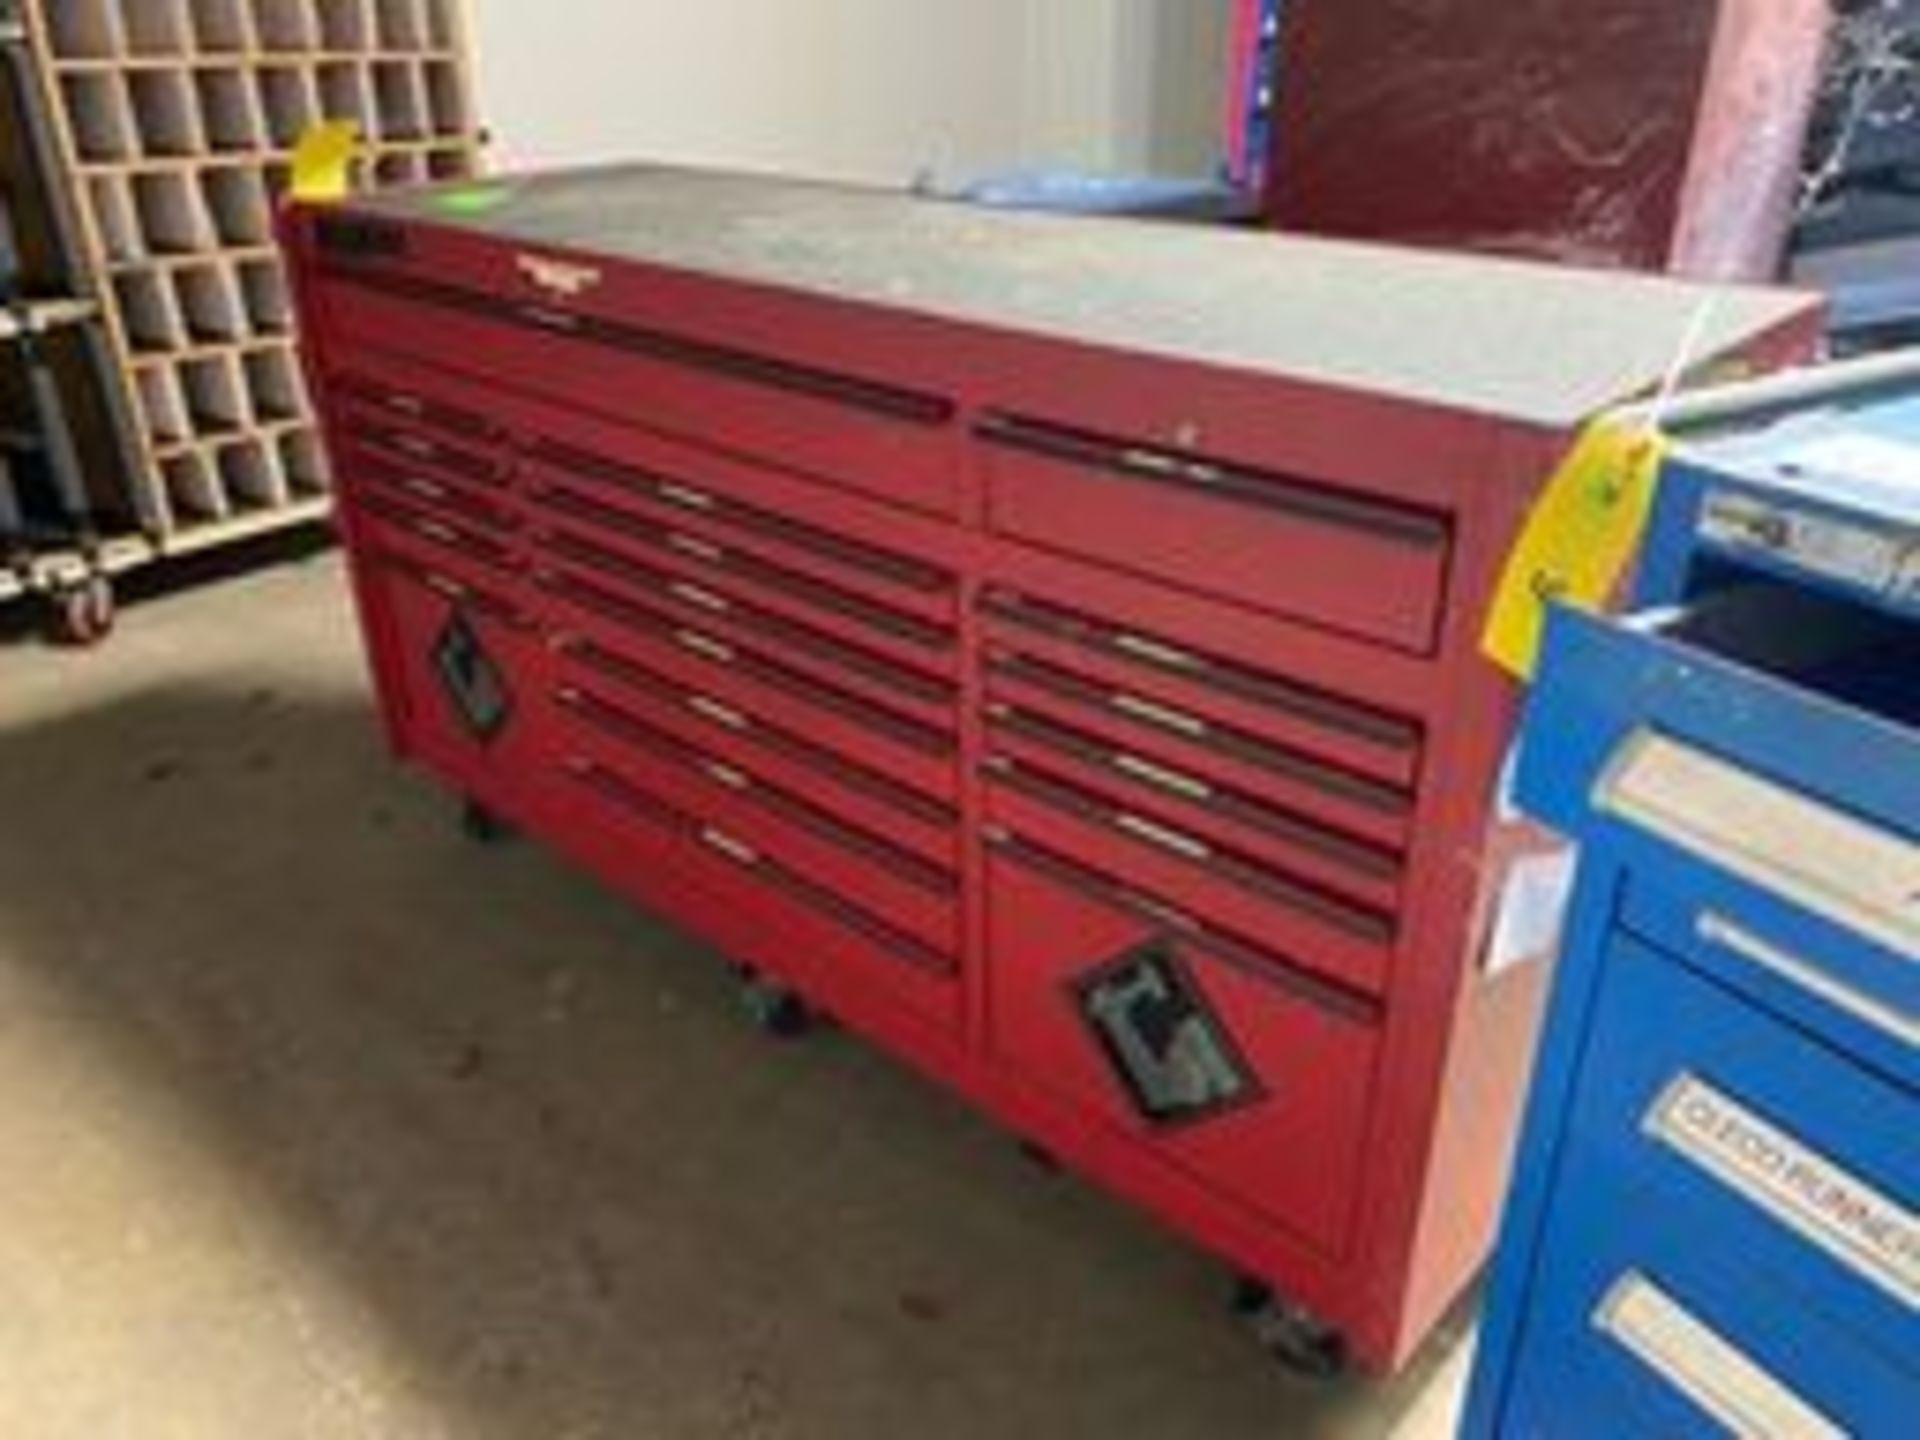 Armstrong Industrial Tool Box Rigging Price: $50 - Image 2 of 3